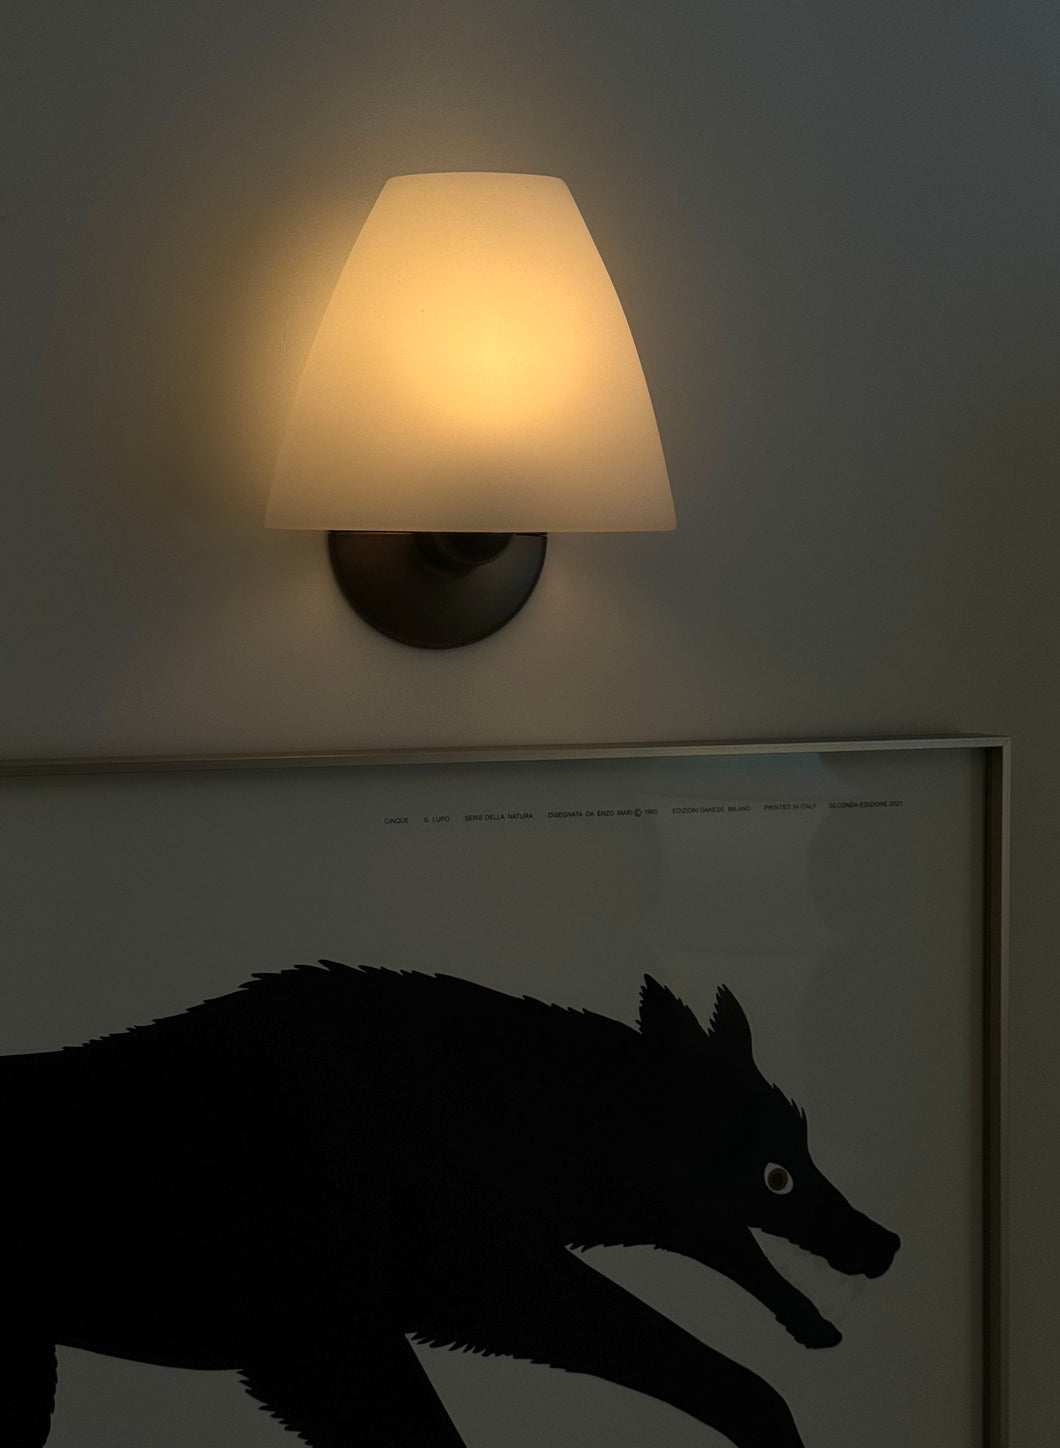 Sally wall sconce by Marcello Ziliani for Arteluce/Flos